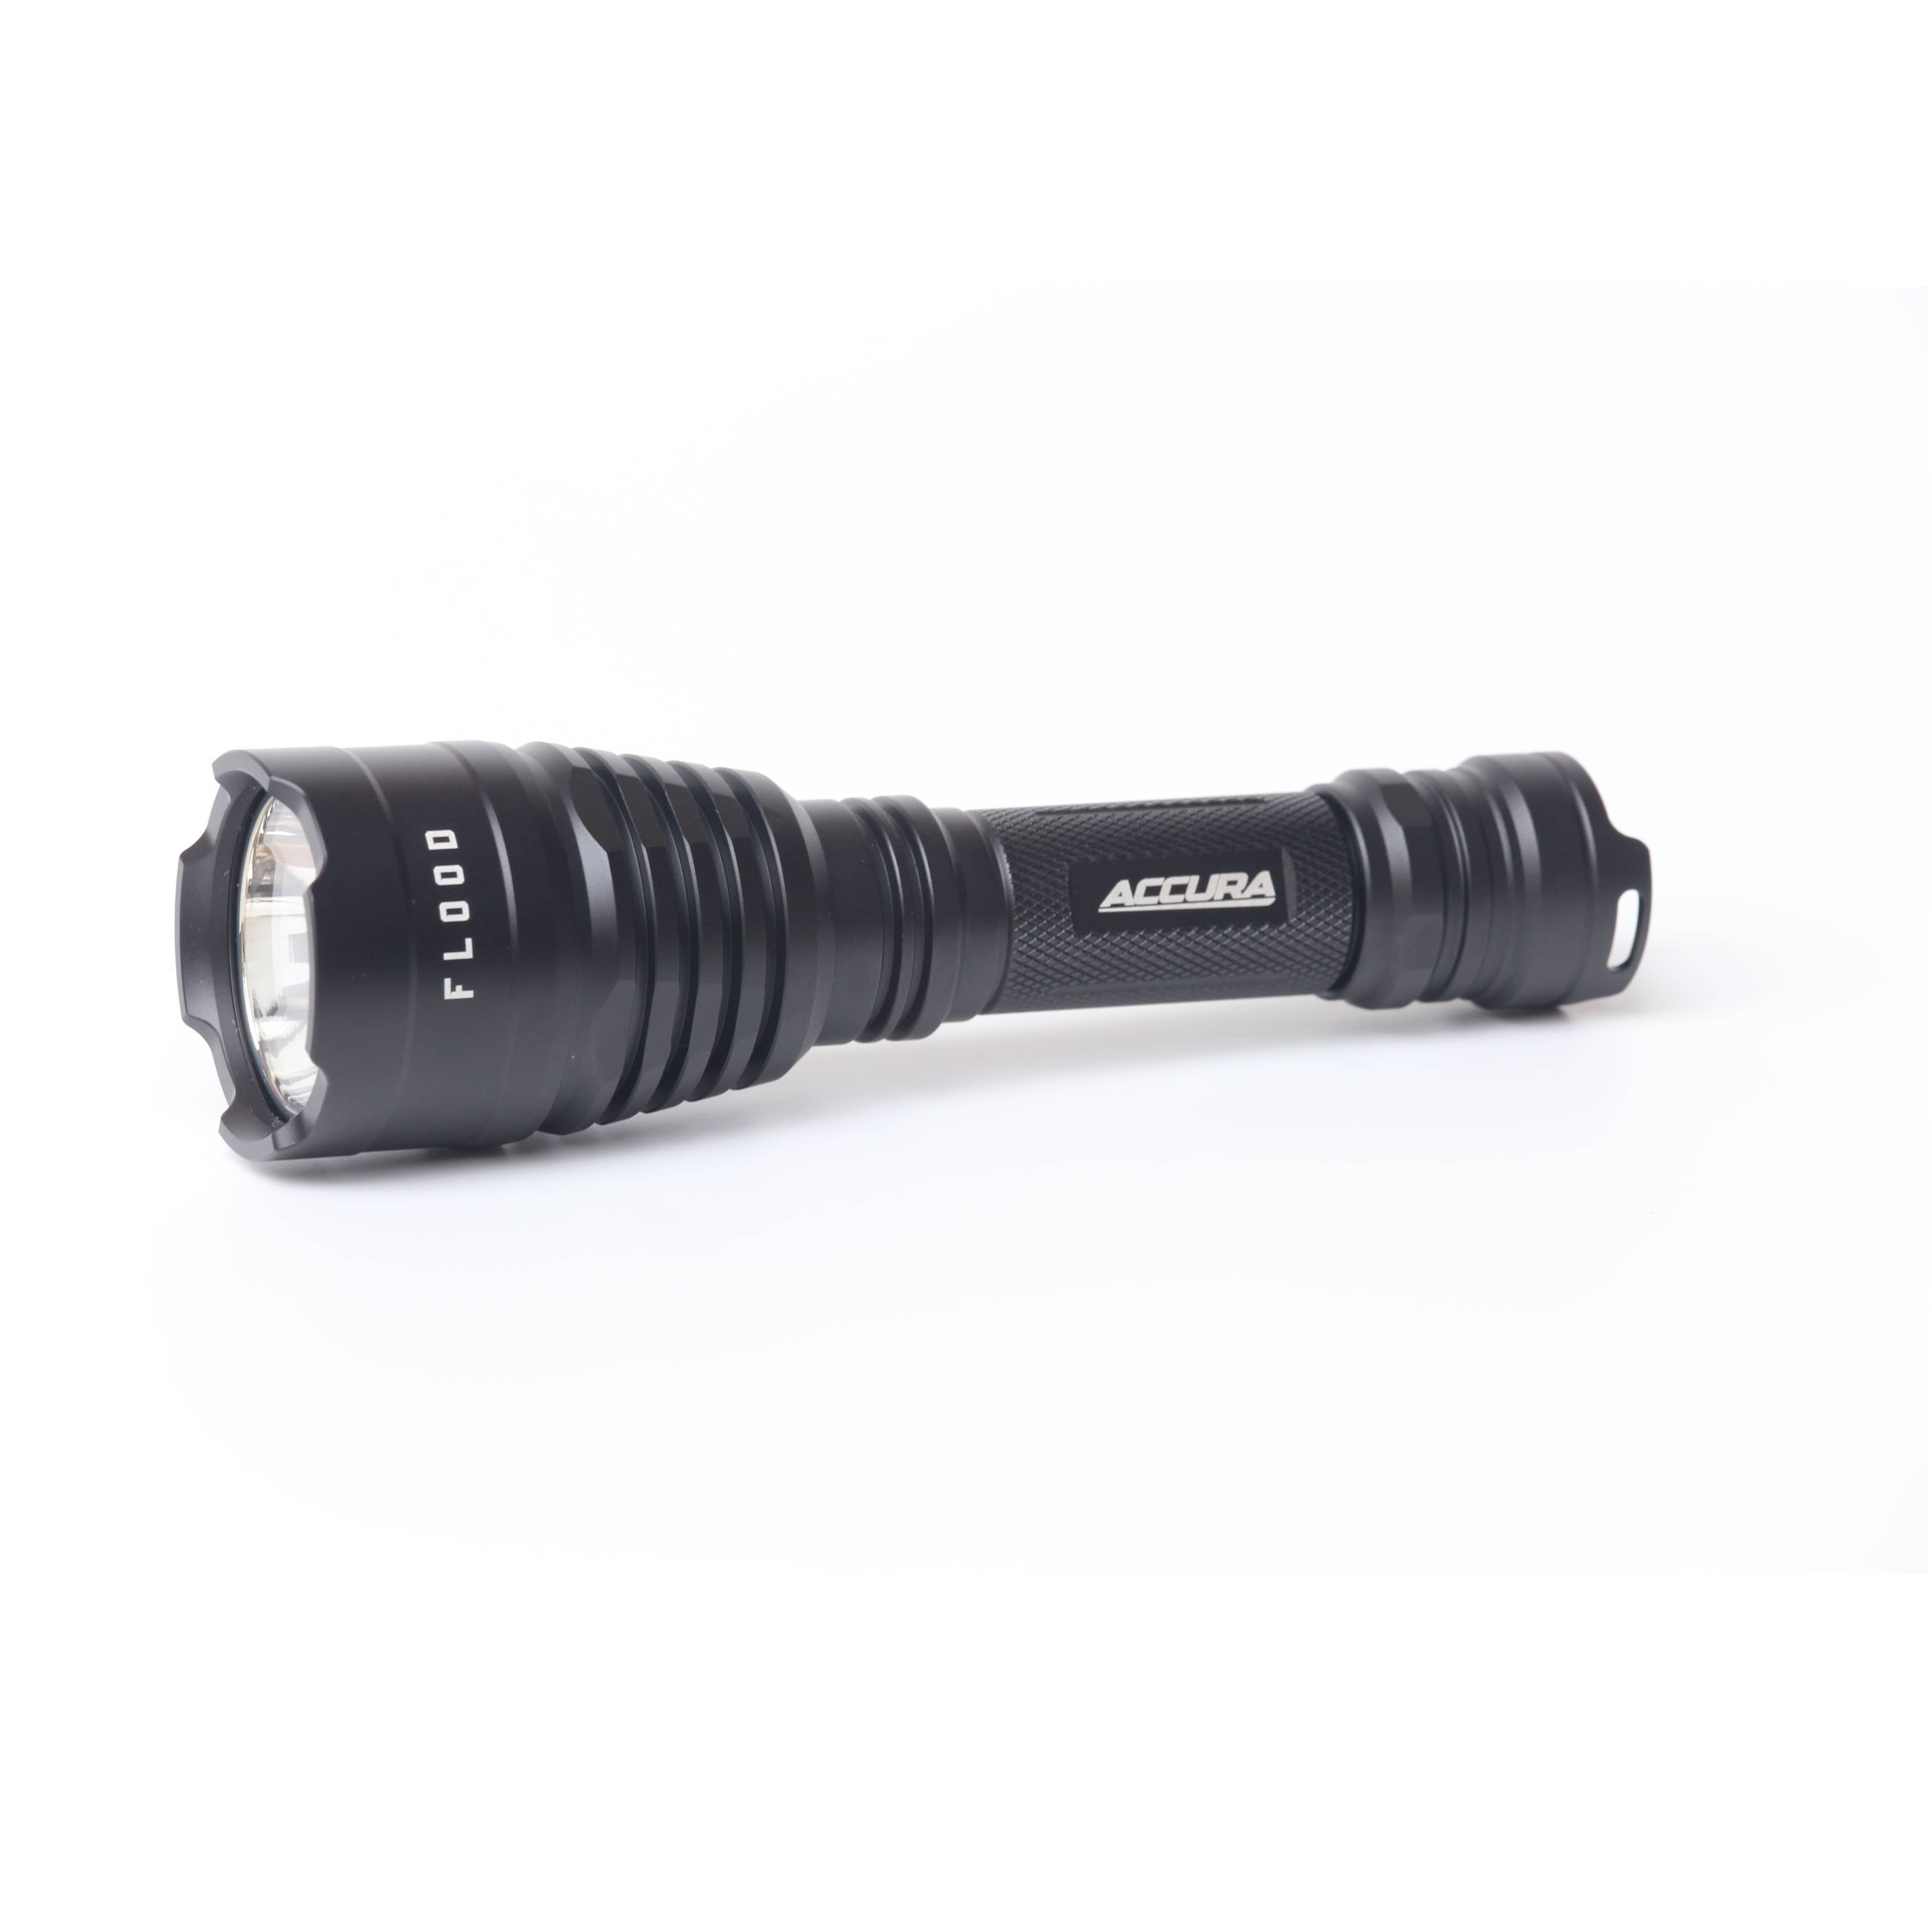 Accura Flood LED Torch 1000 LM